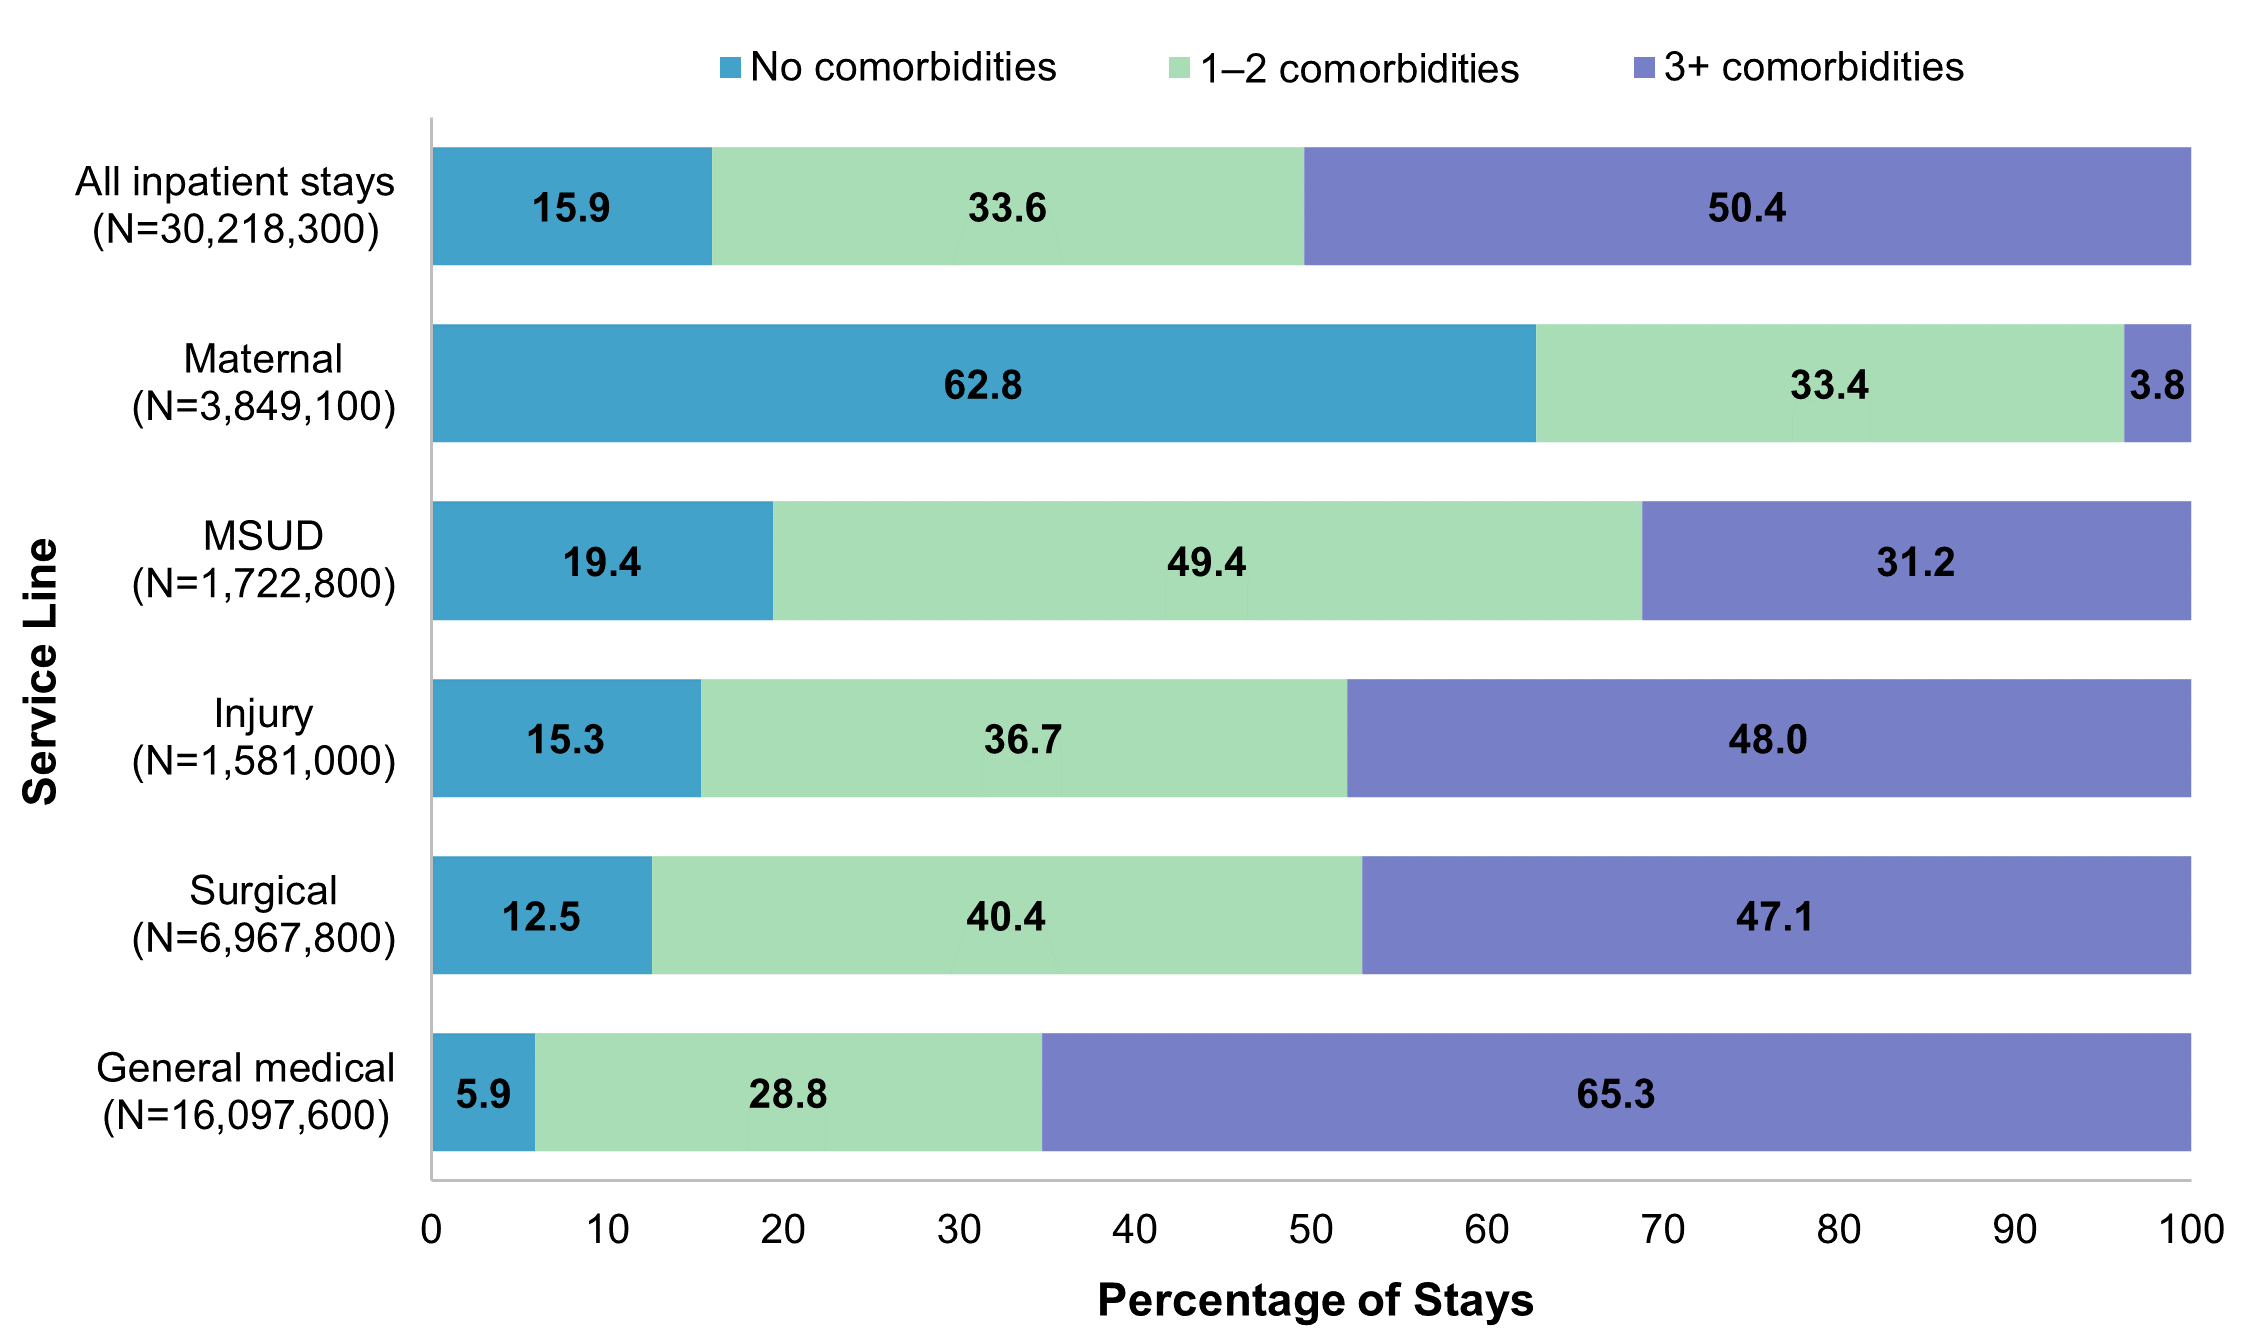 Bar chart showing the percentage of adult stays with no, one to two, or three or more comorbidities by hospital service line (i.e., general reason for the stay), in 2019. Data are provided in Supplemental Table 3.